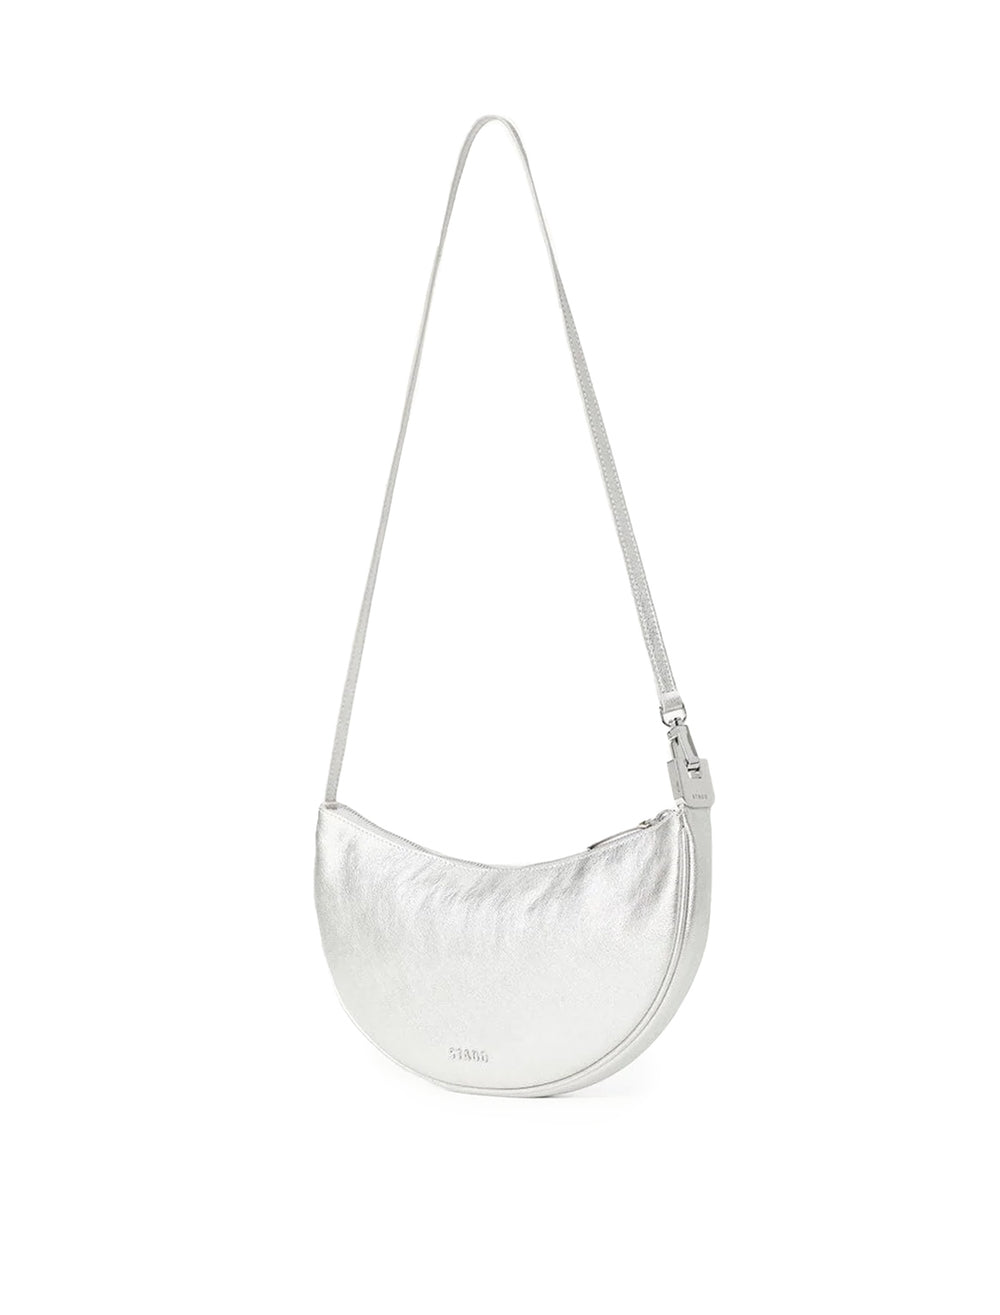 Front angle view of STAUD's walker shoulder bag in silver.